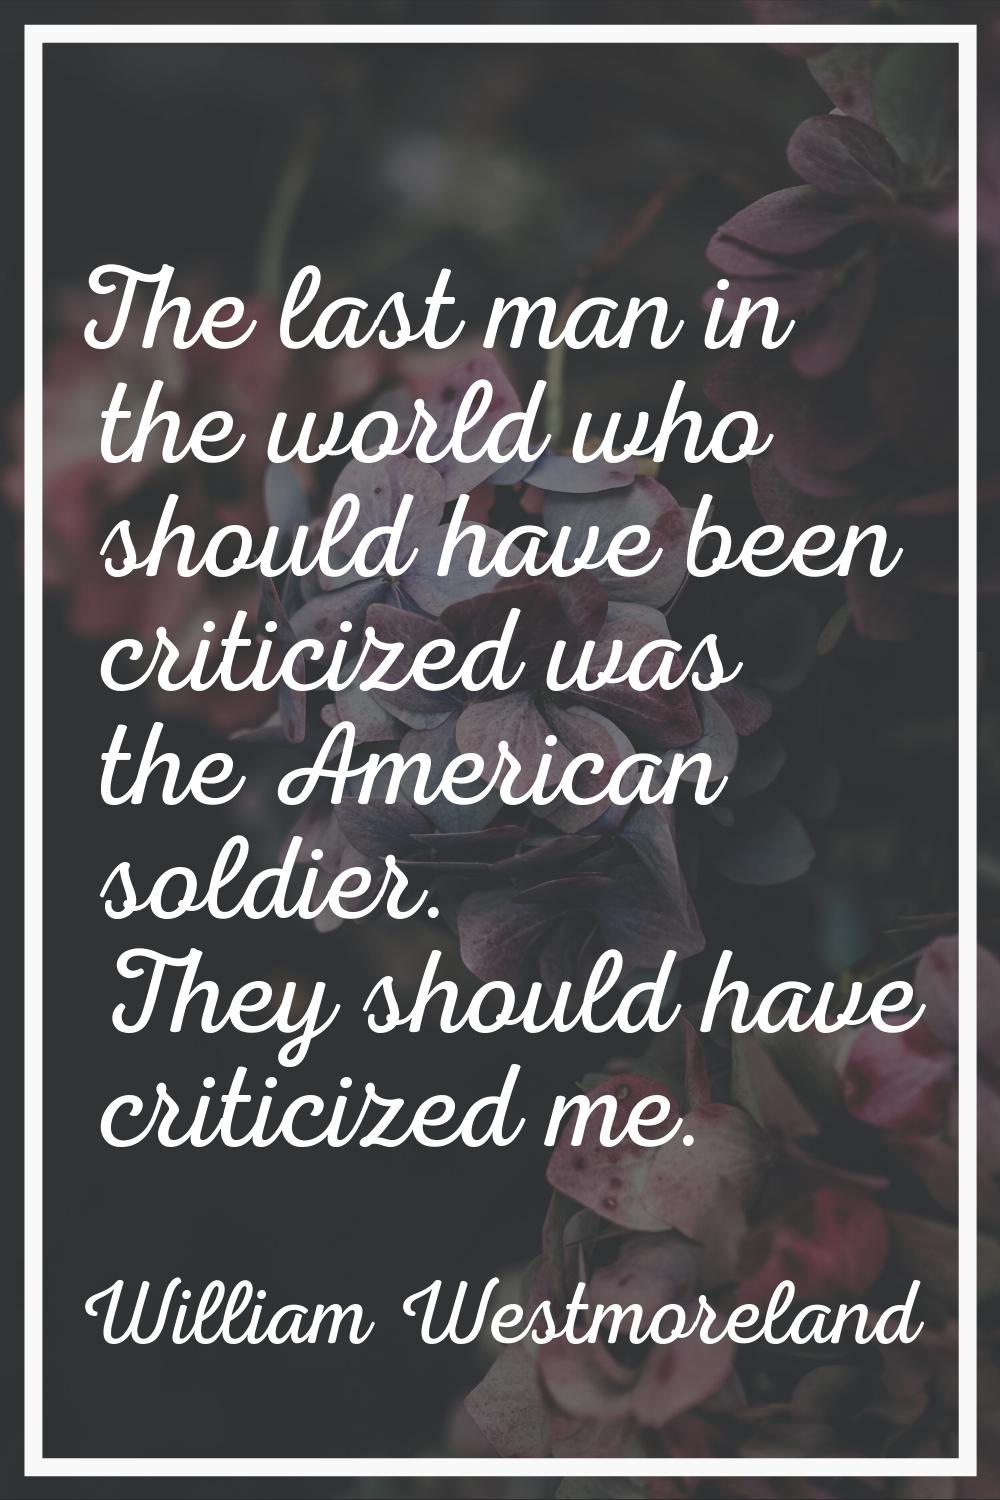 The last man in the world who should have been criticized was the American soldier. They should hav